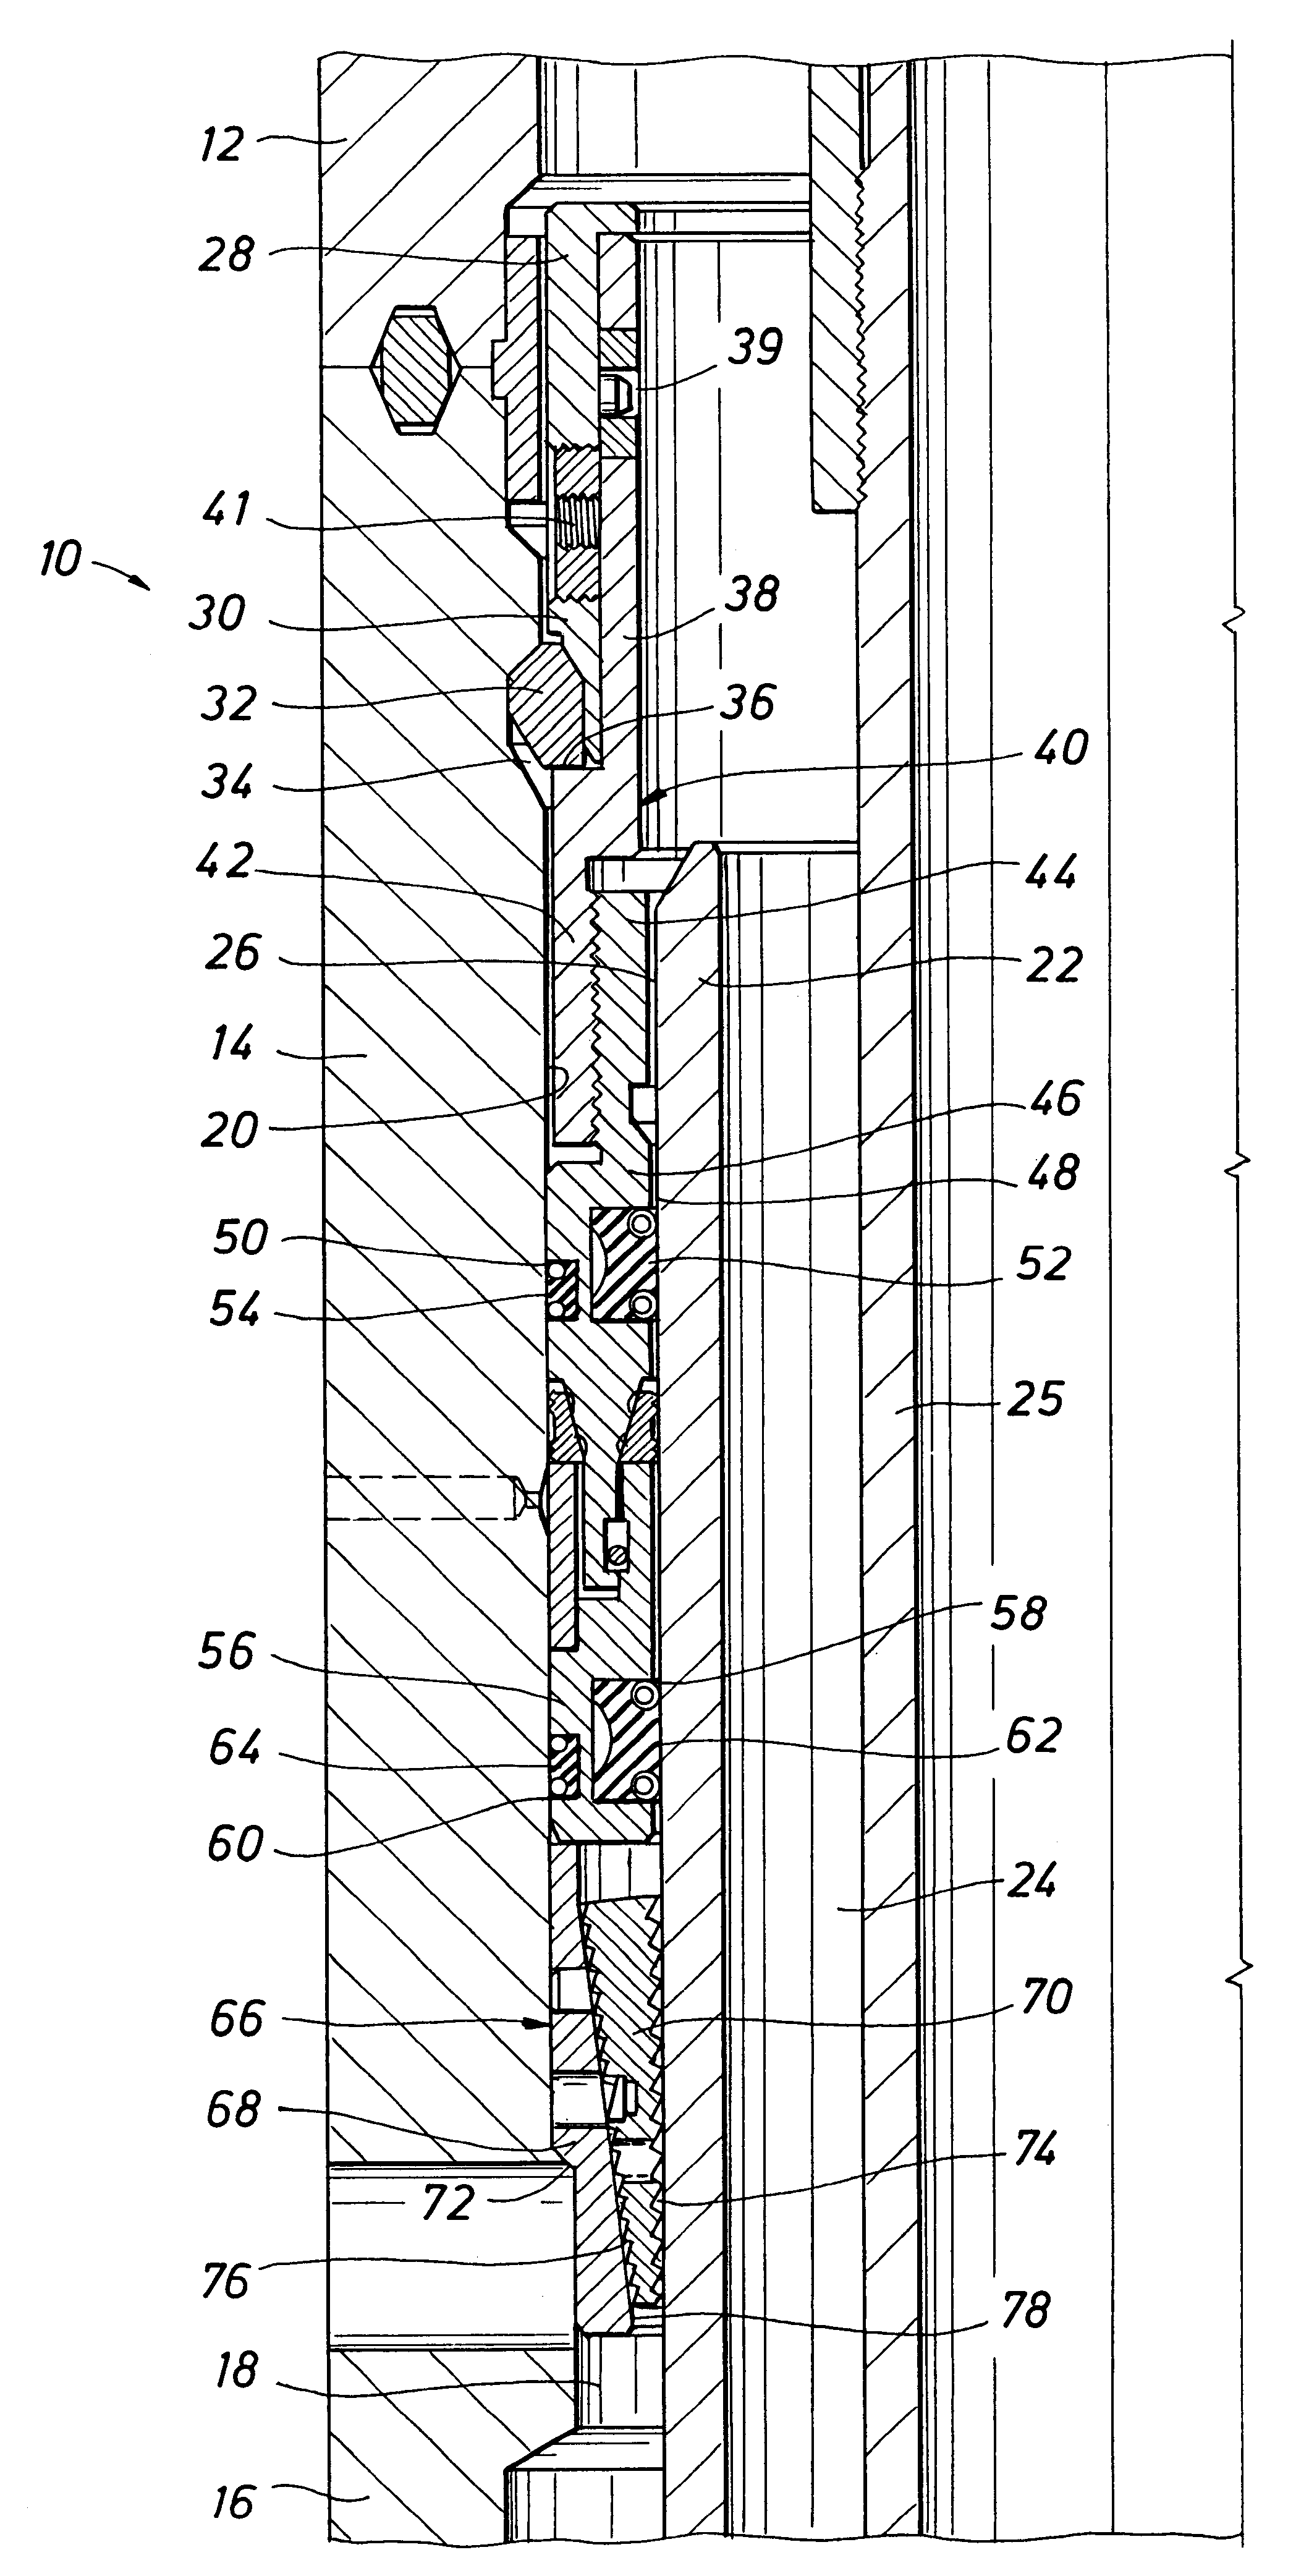 Energized sealing cartridge for annulus sealing between tubular well components